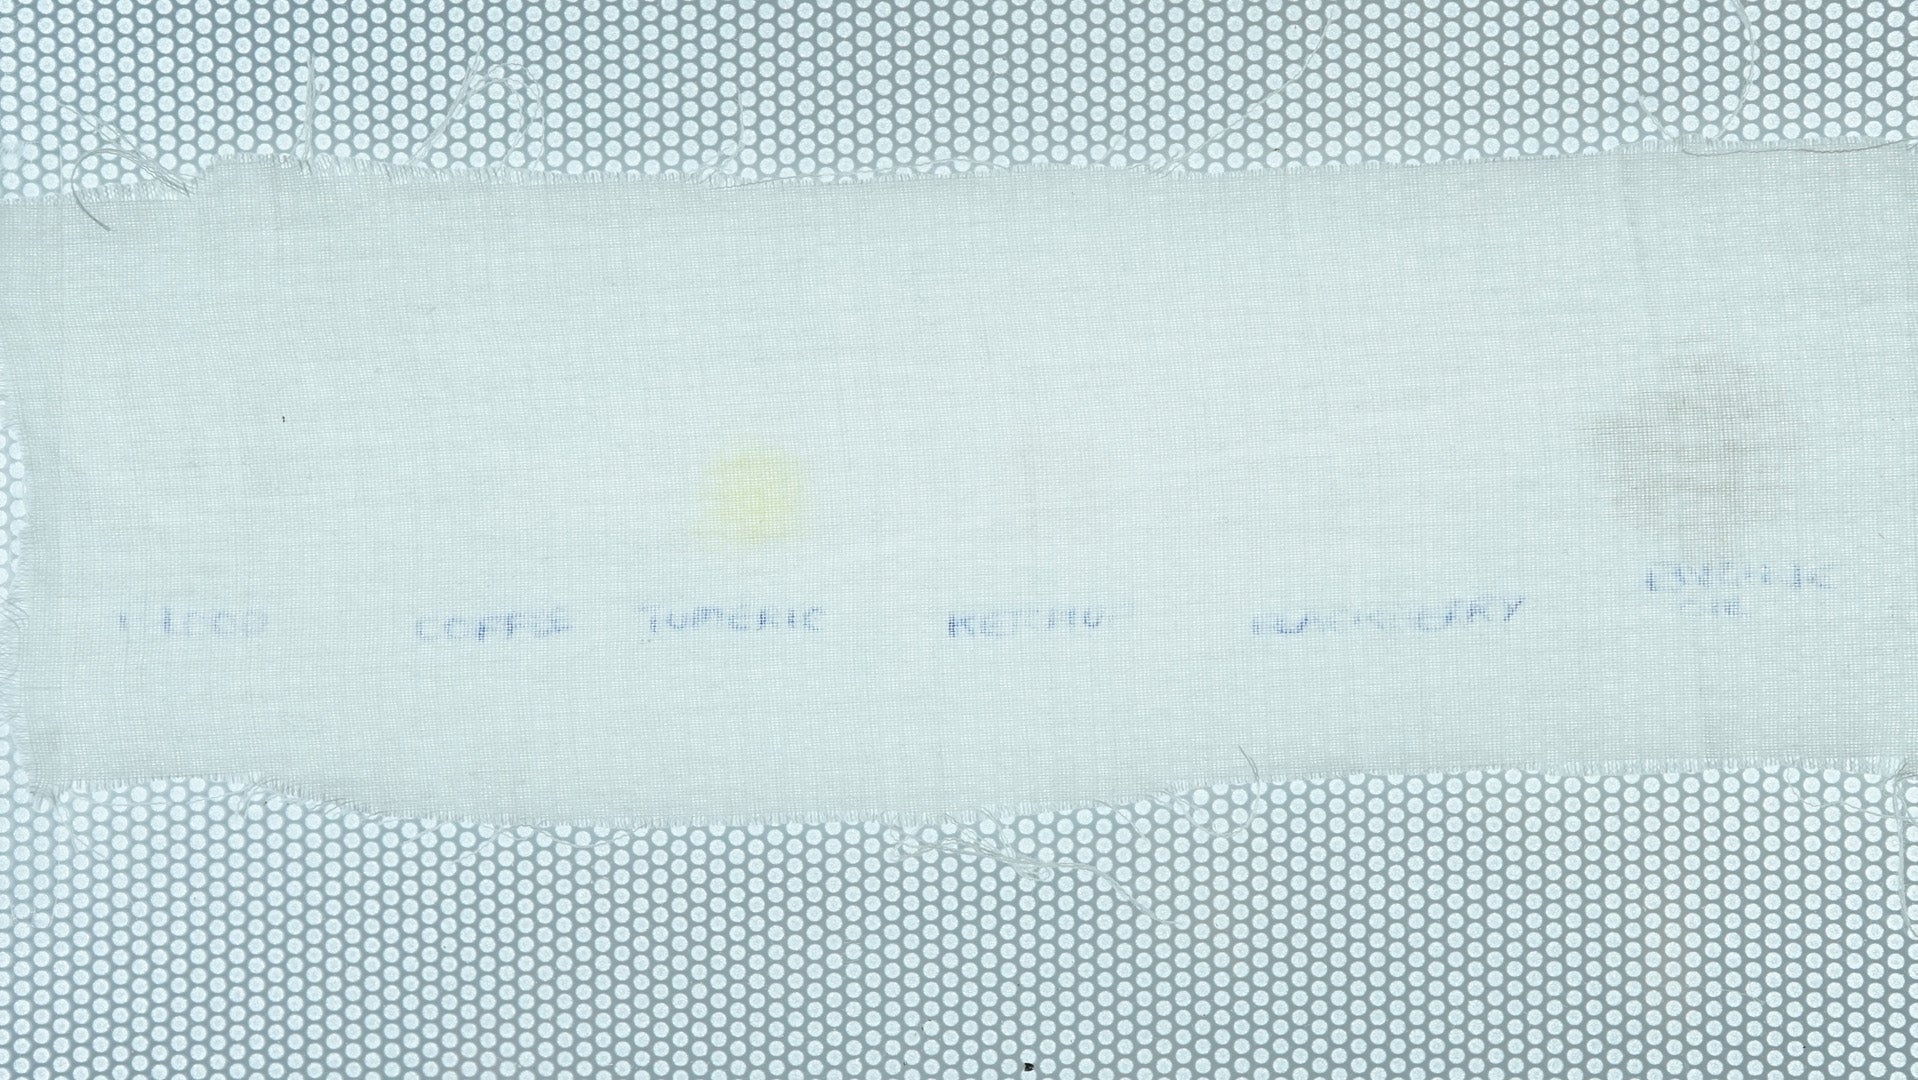 Stain removal test fabric with labeled stains after washing.